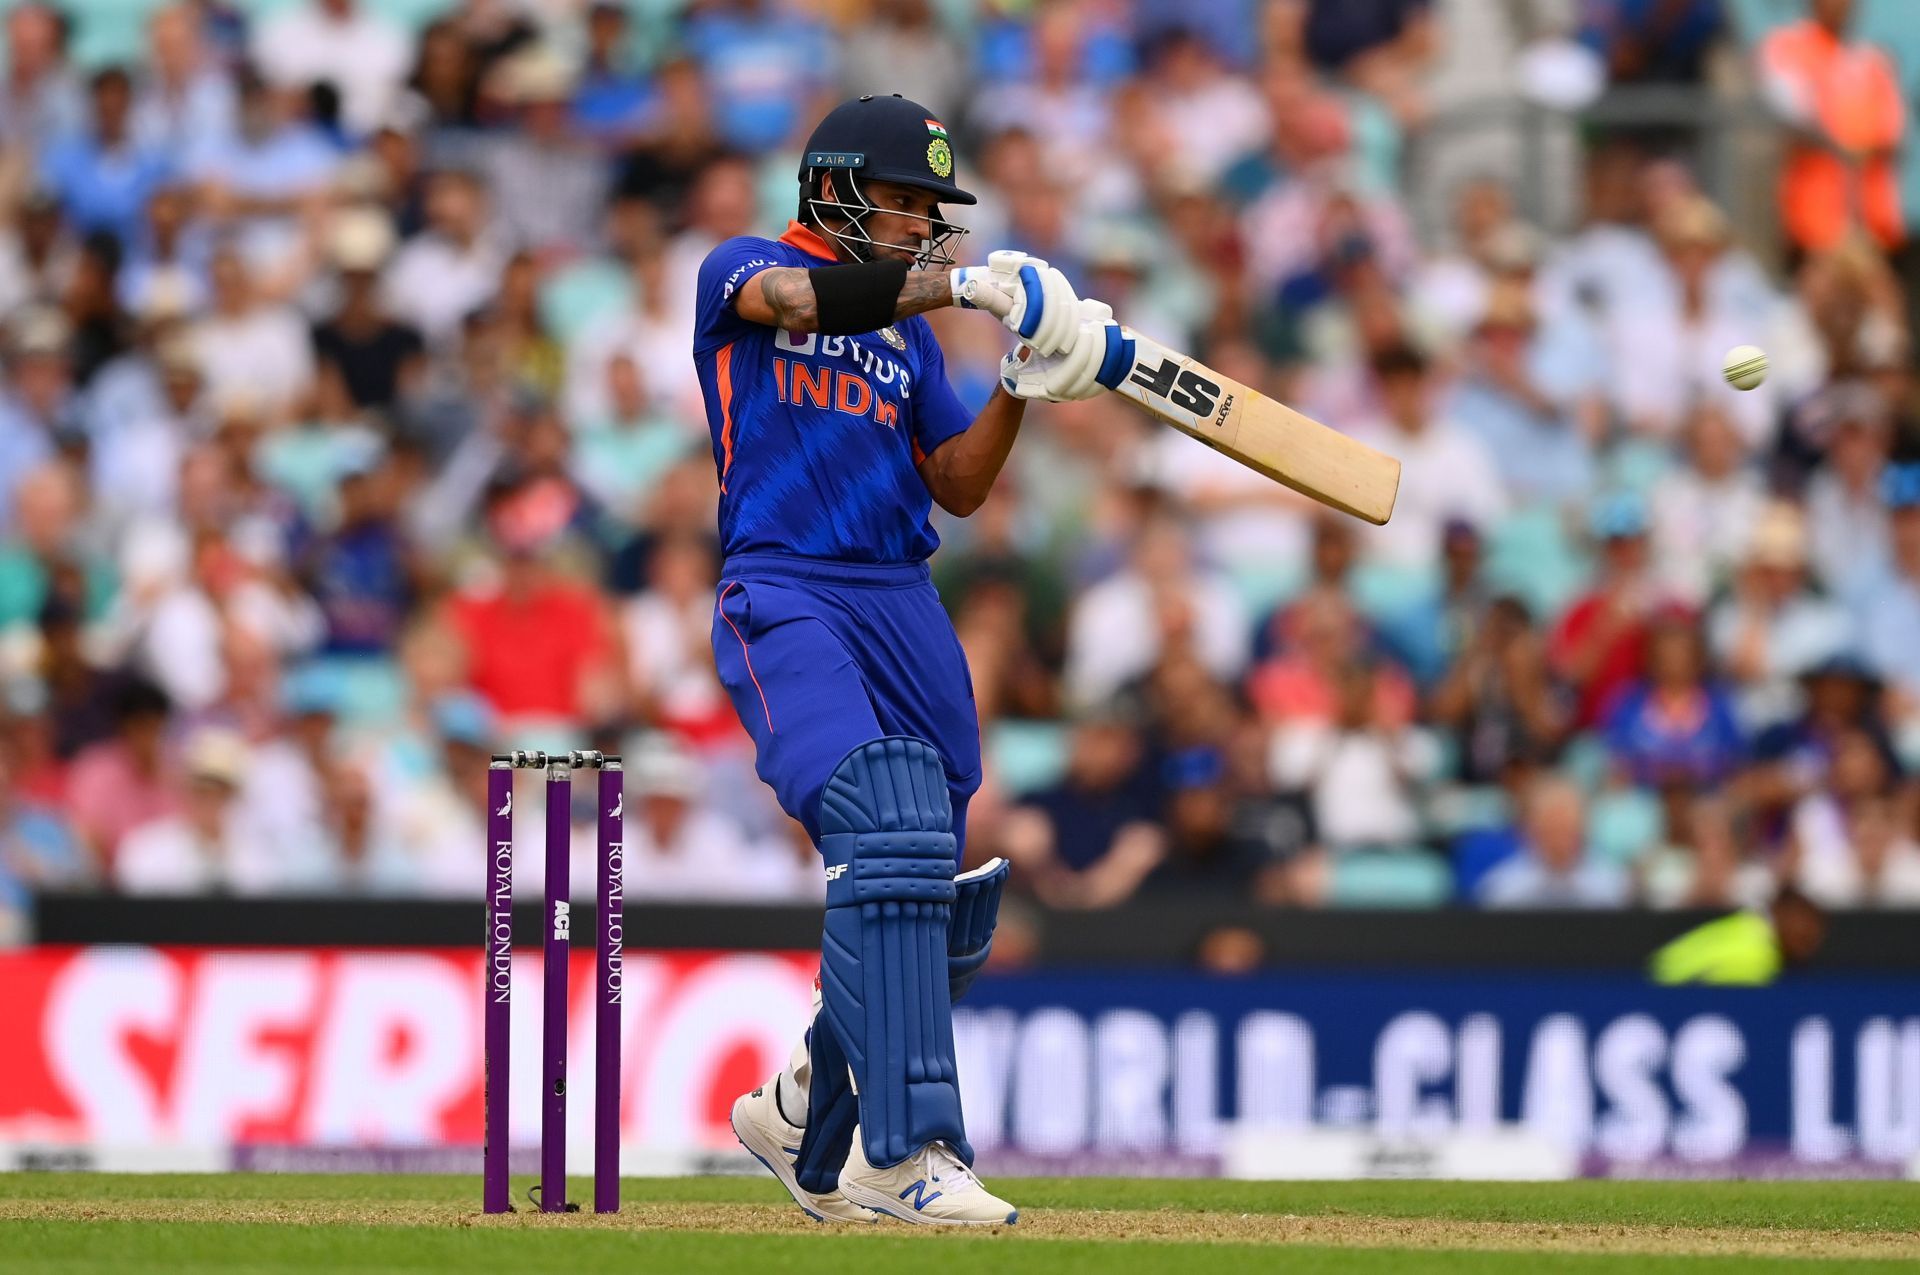 Shikhar Dhawan was dismissed cheaply in the last two ODIs against England